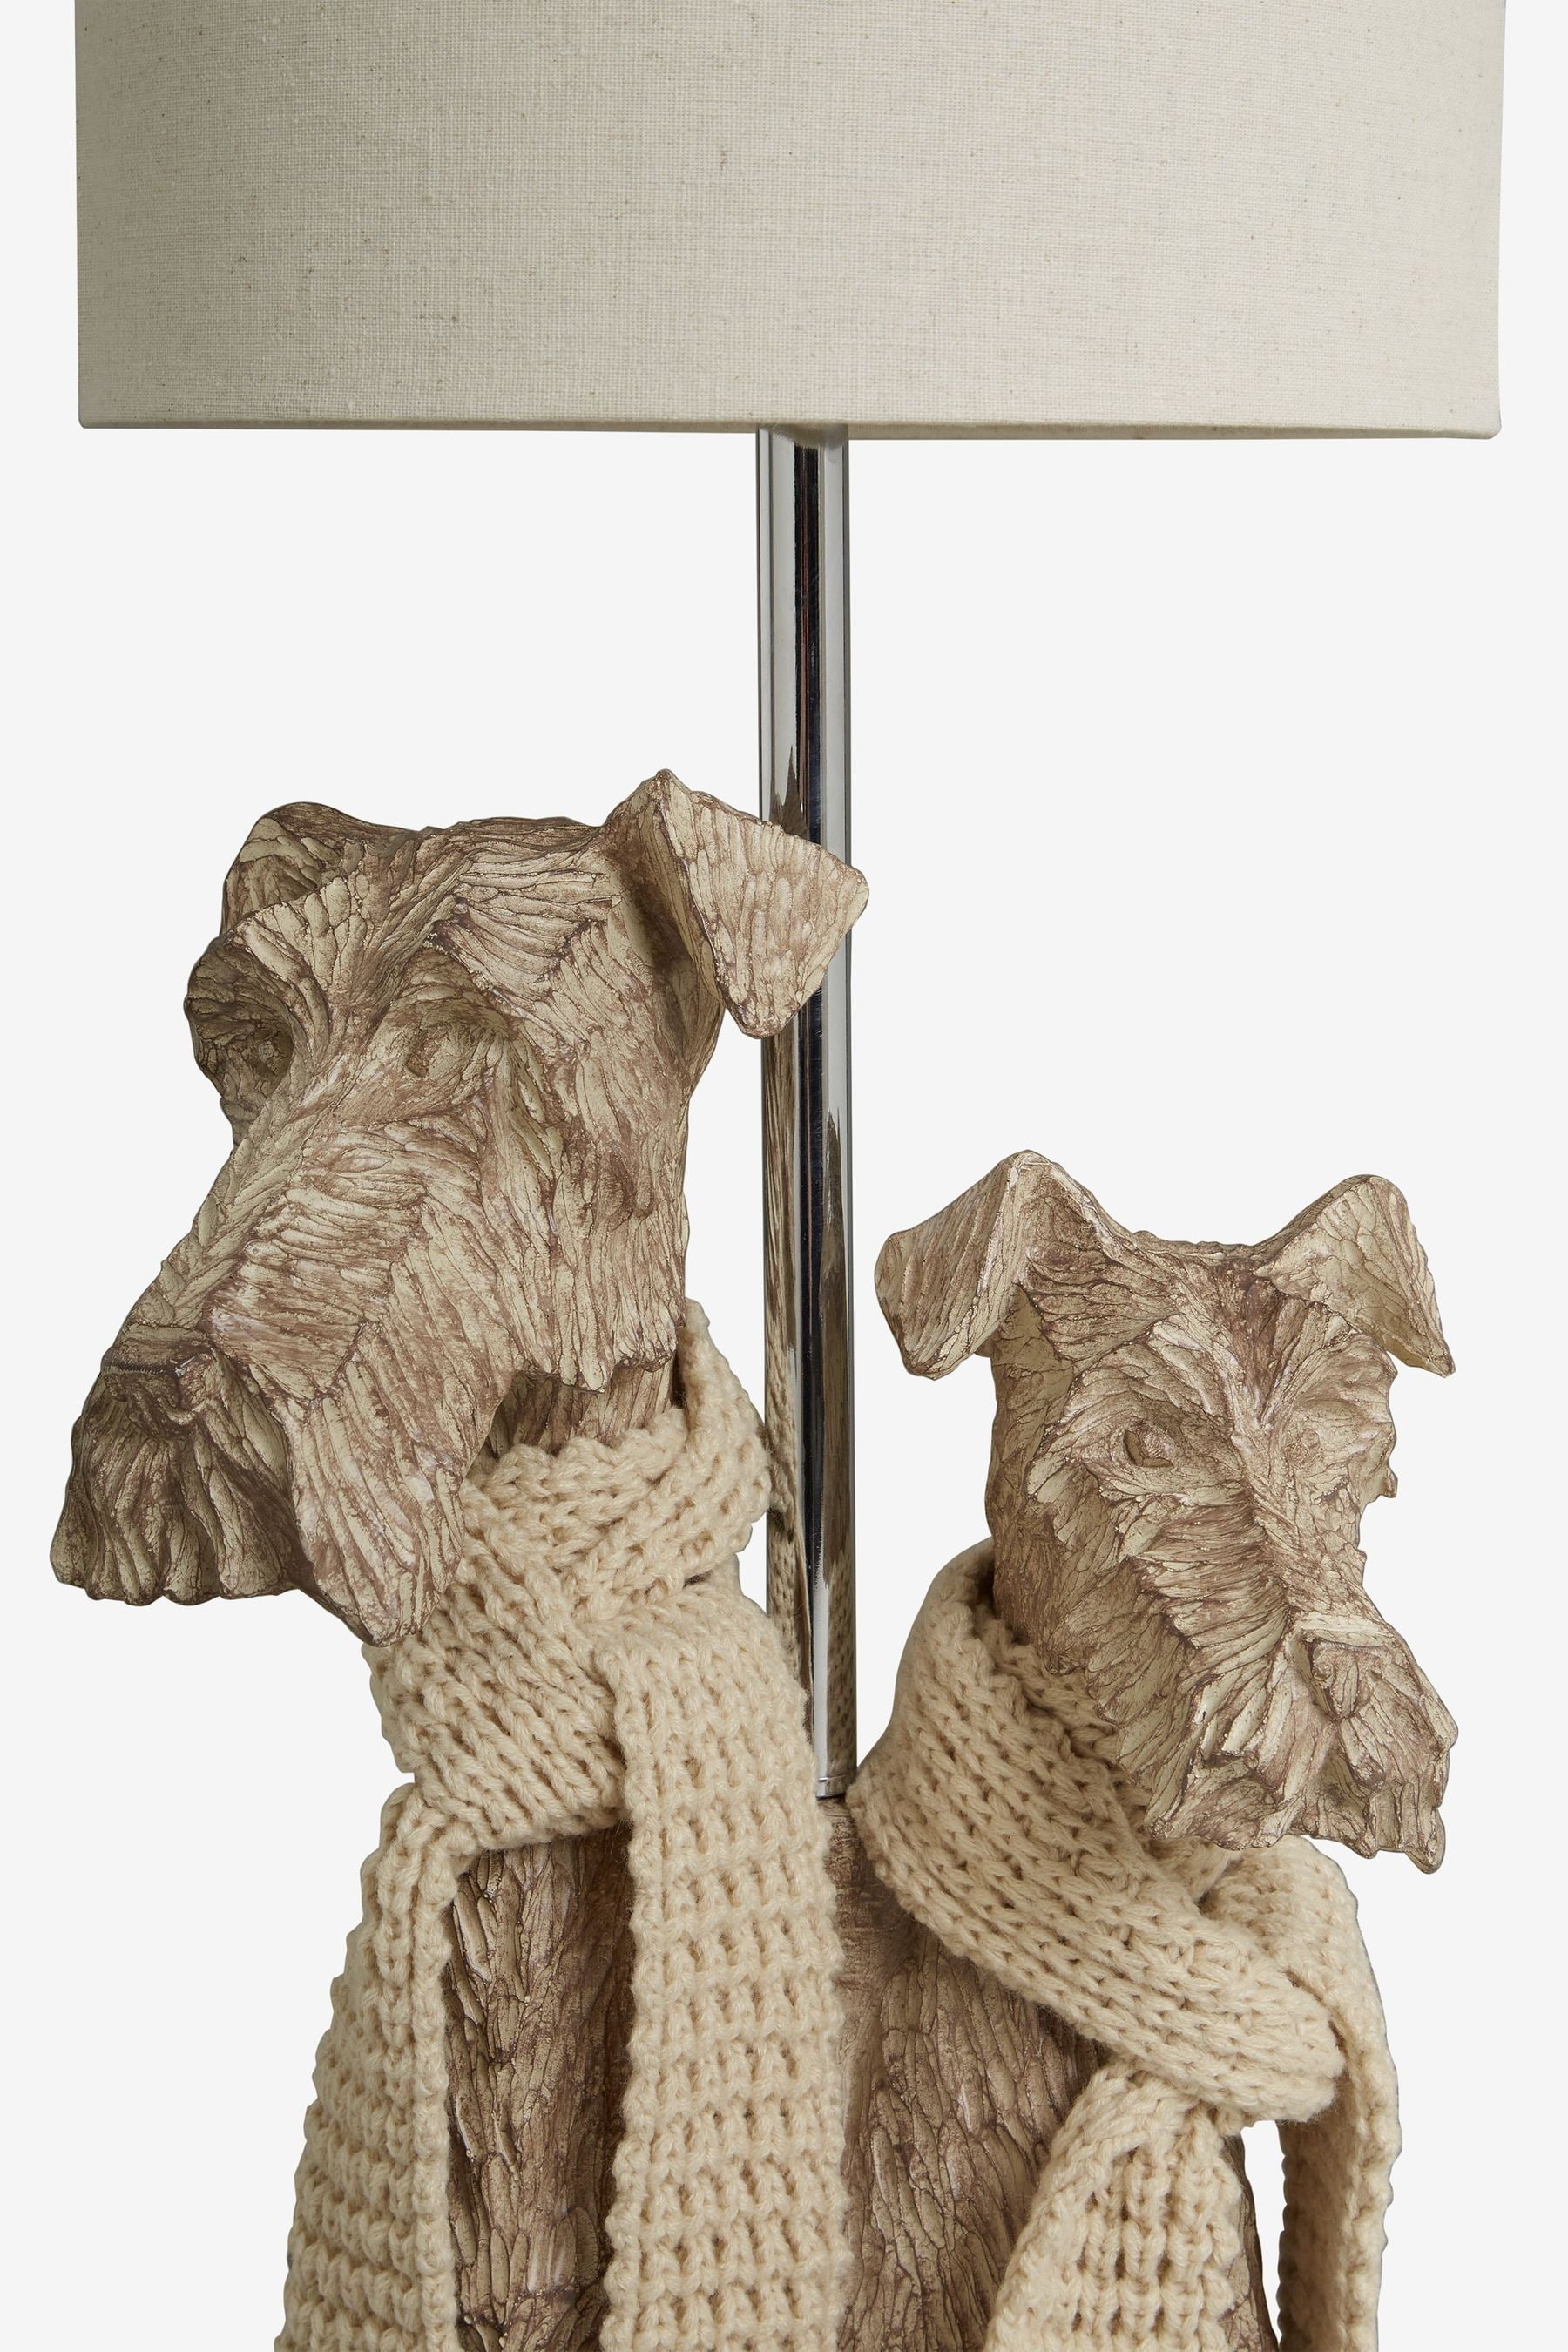 Buy Natural Dog Friend Floor Lamp from the Next UK online shop